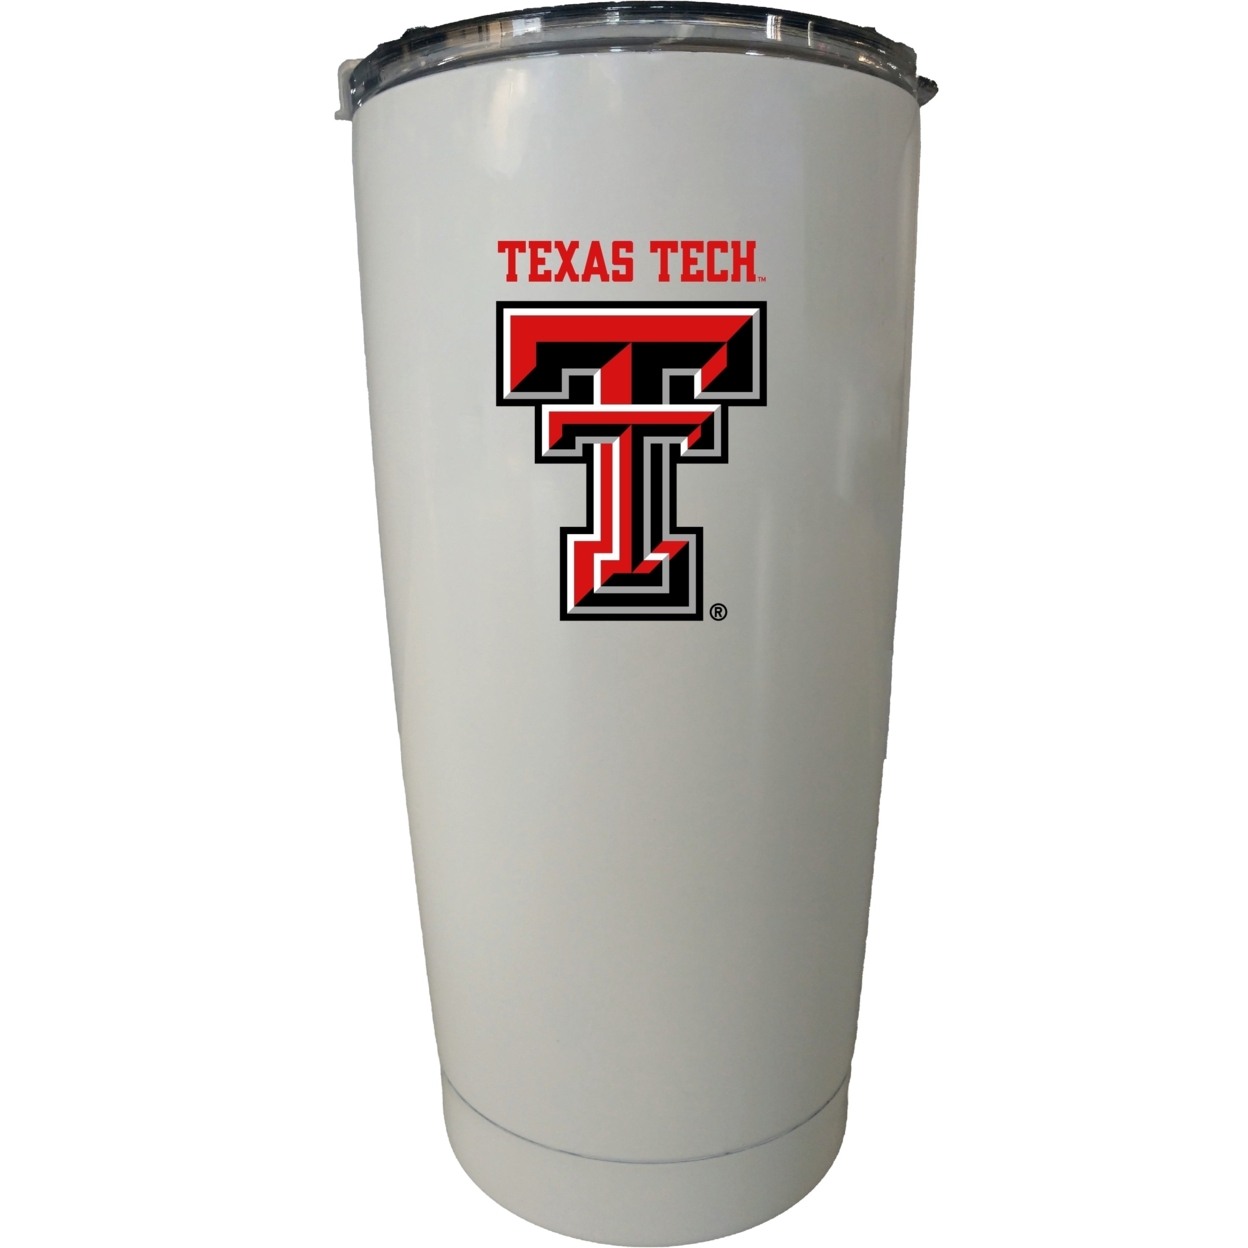 Texas Tech University Choose Your Color Insulated Stainless Steel Tumbler Choose Your Color.